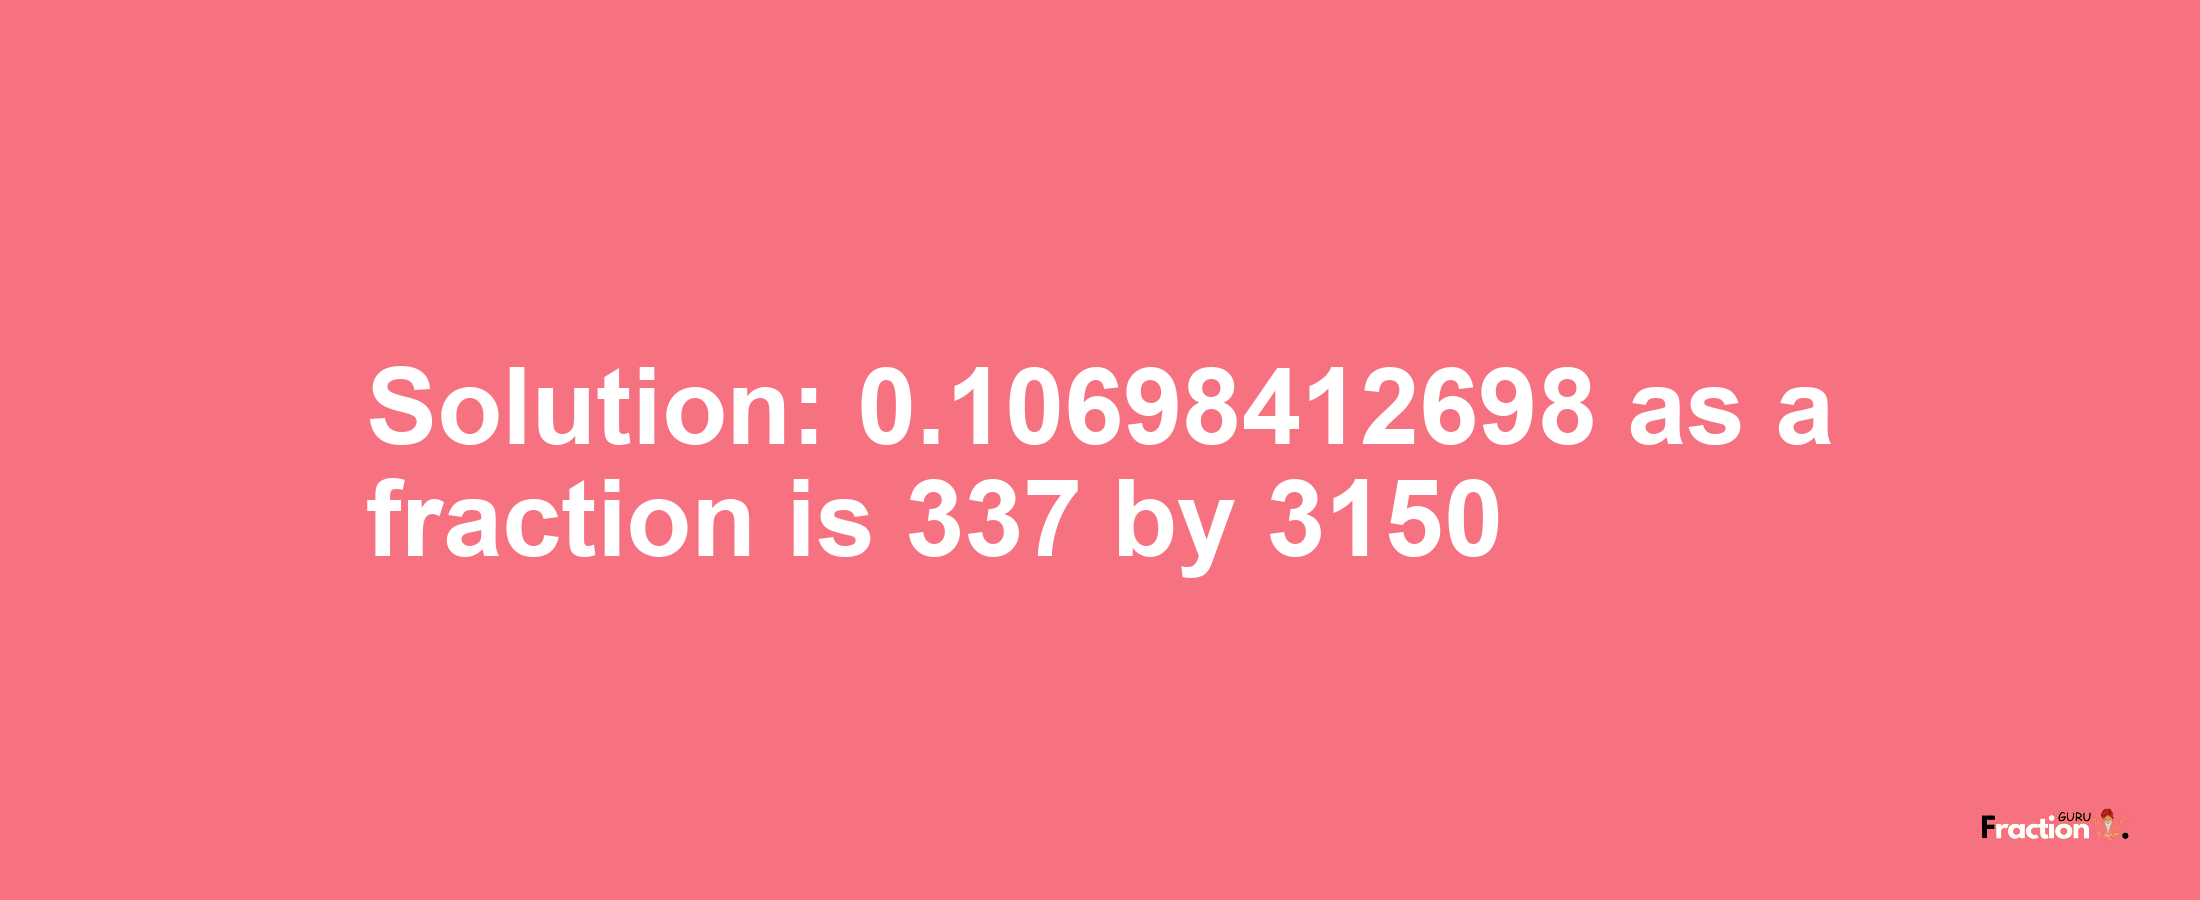 Solution:0.10698412698 as a fraction is 337/3150